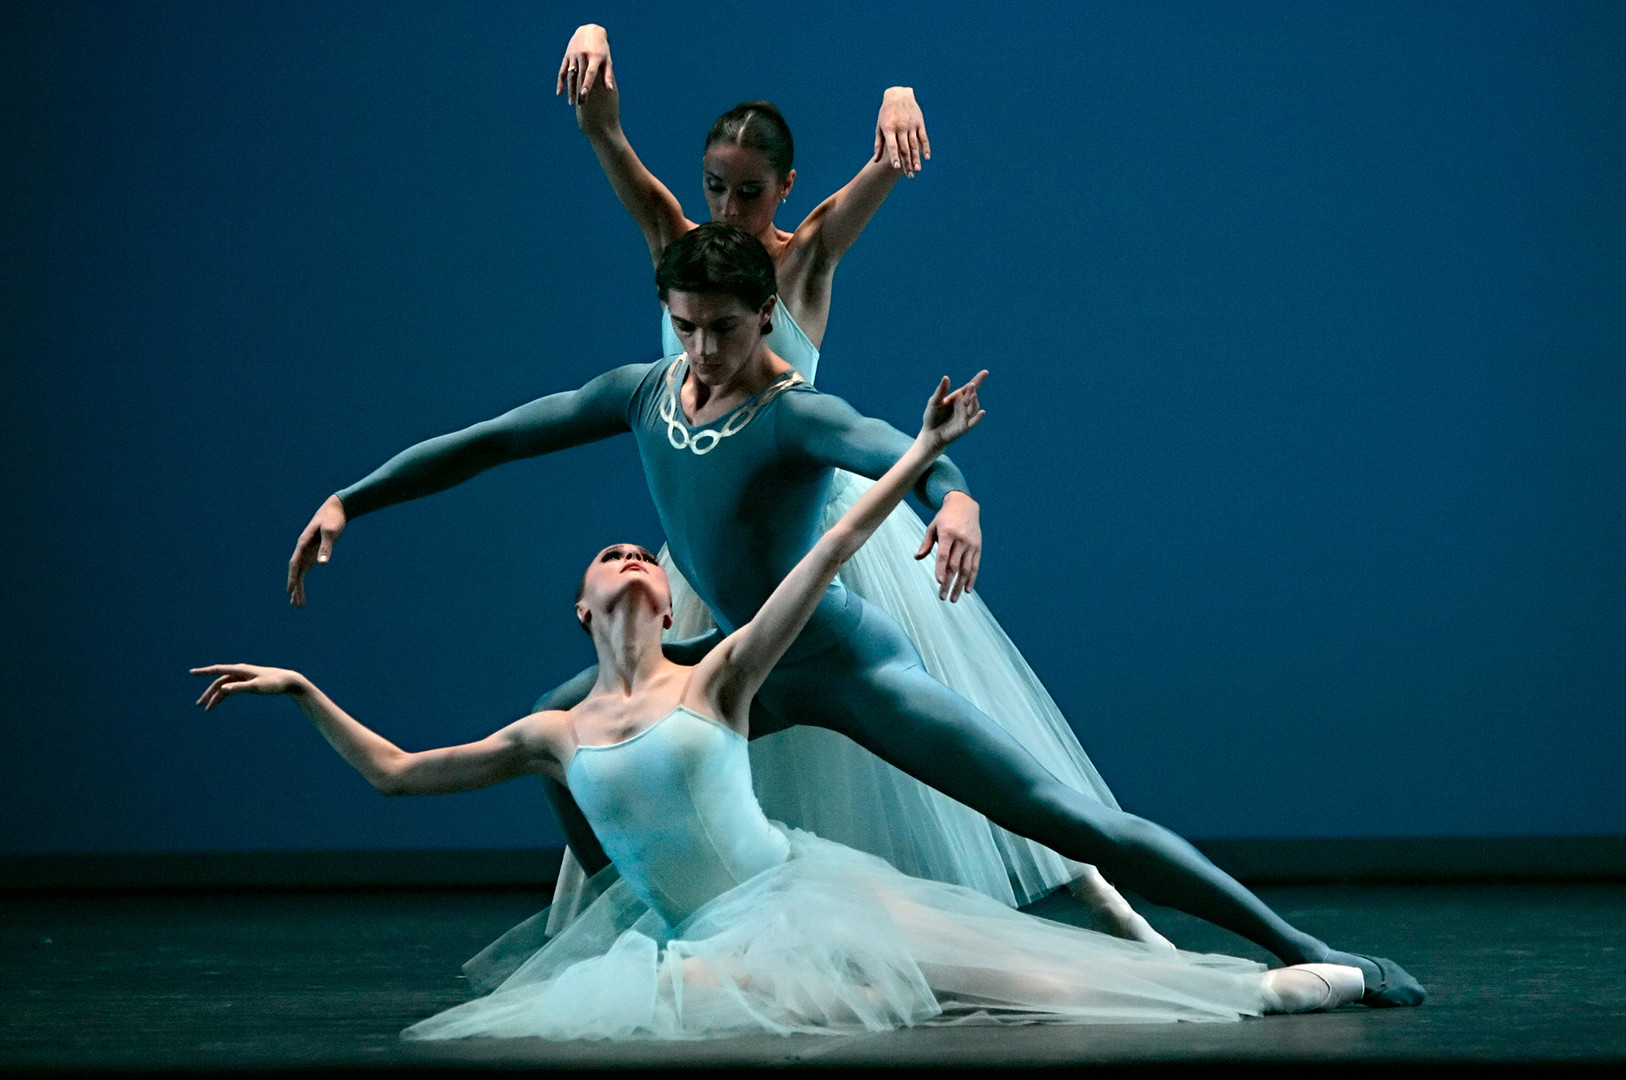 Pyotr Tchaikovsky's one act ballet Serenade with choreography by George Balanchine in the Bolshoi Theater.